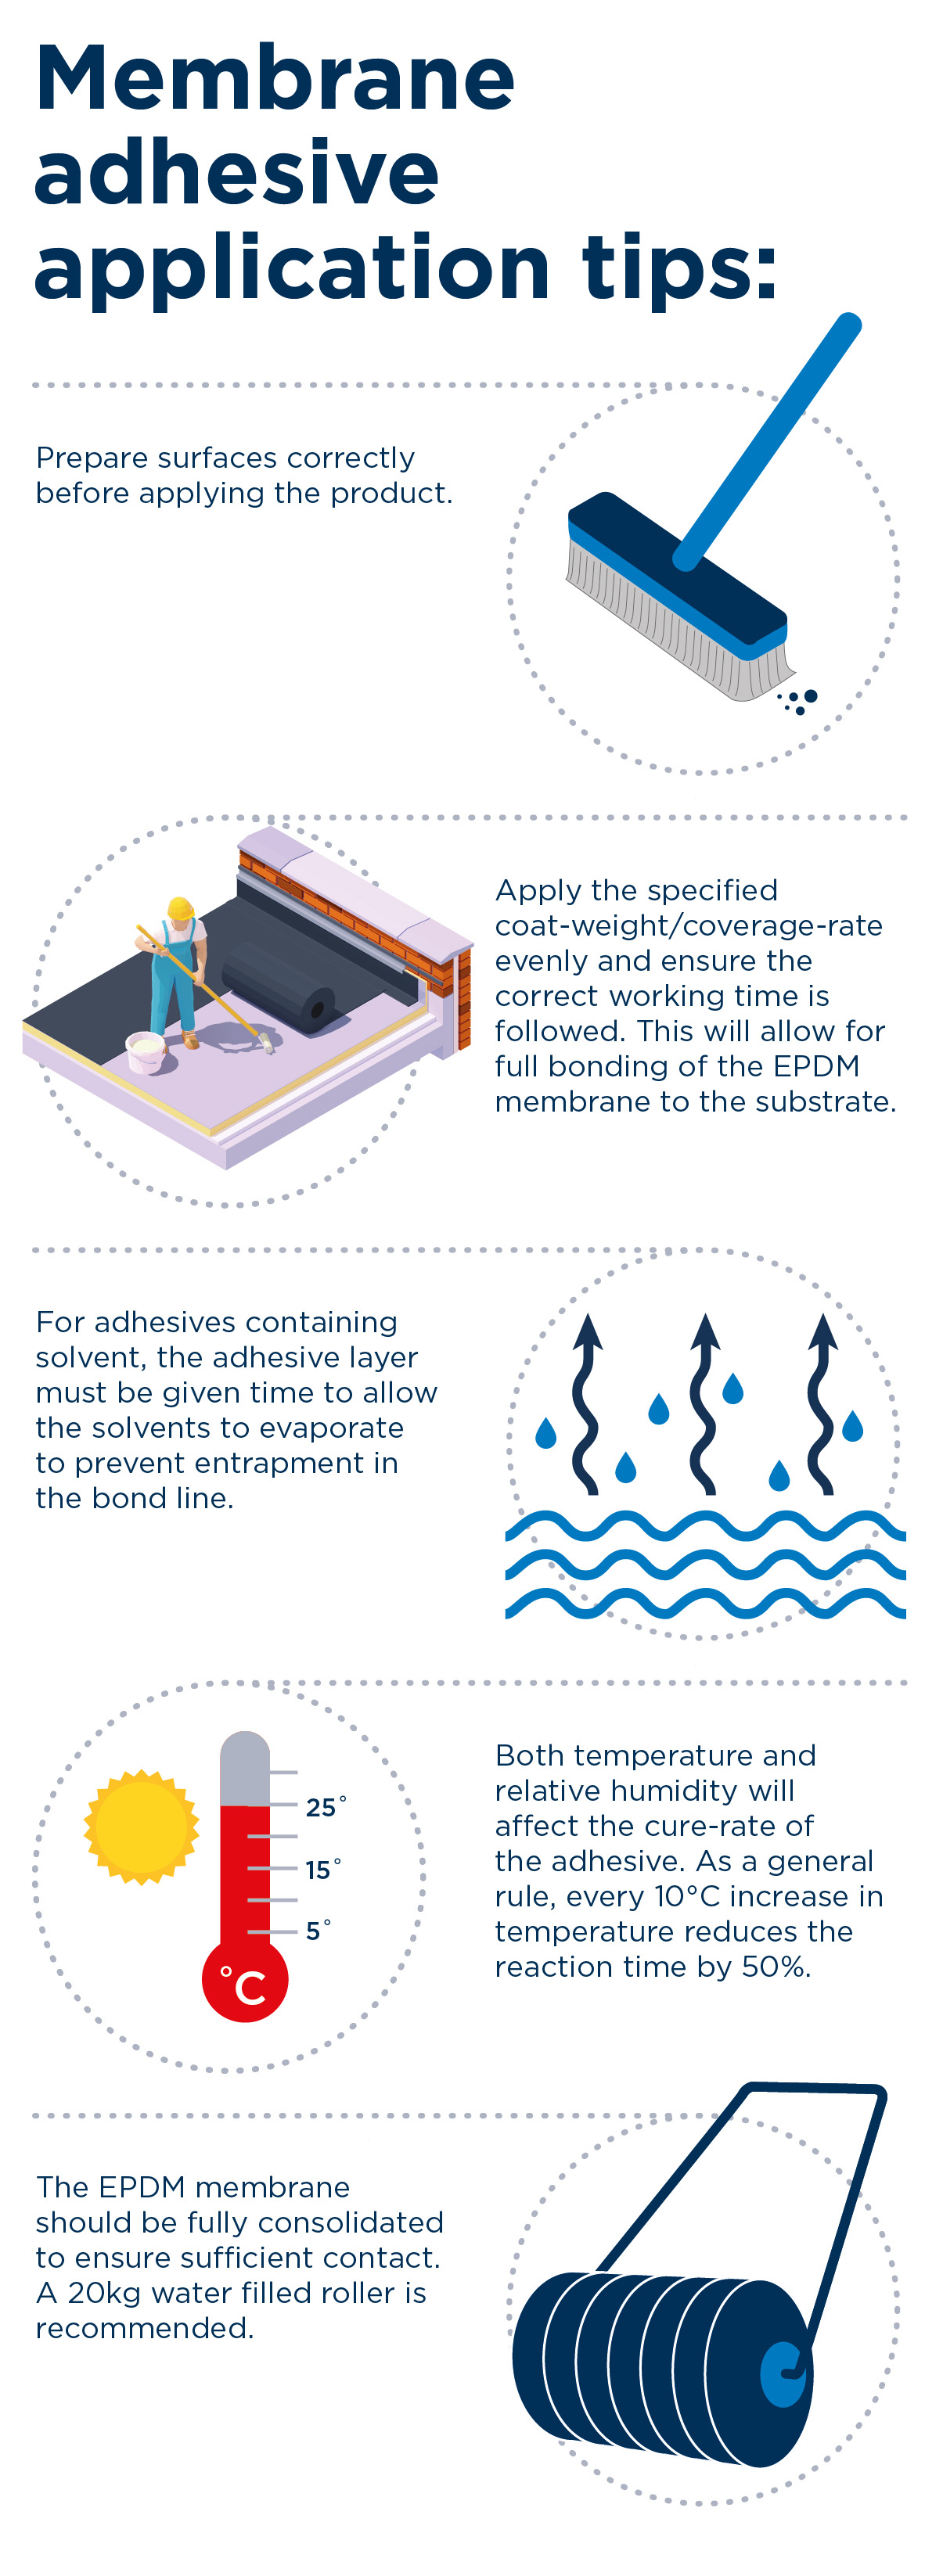 Membrane Adhesive Application Tips - Infographic 